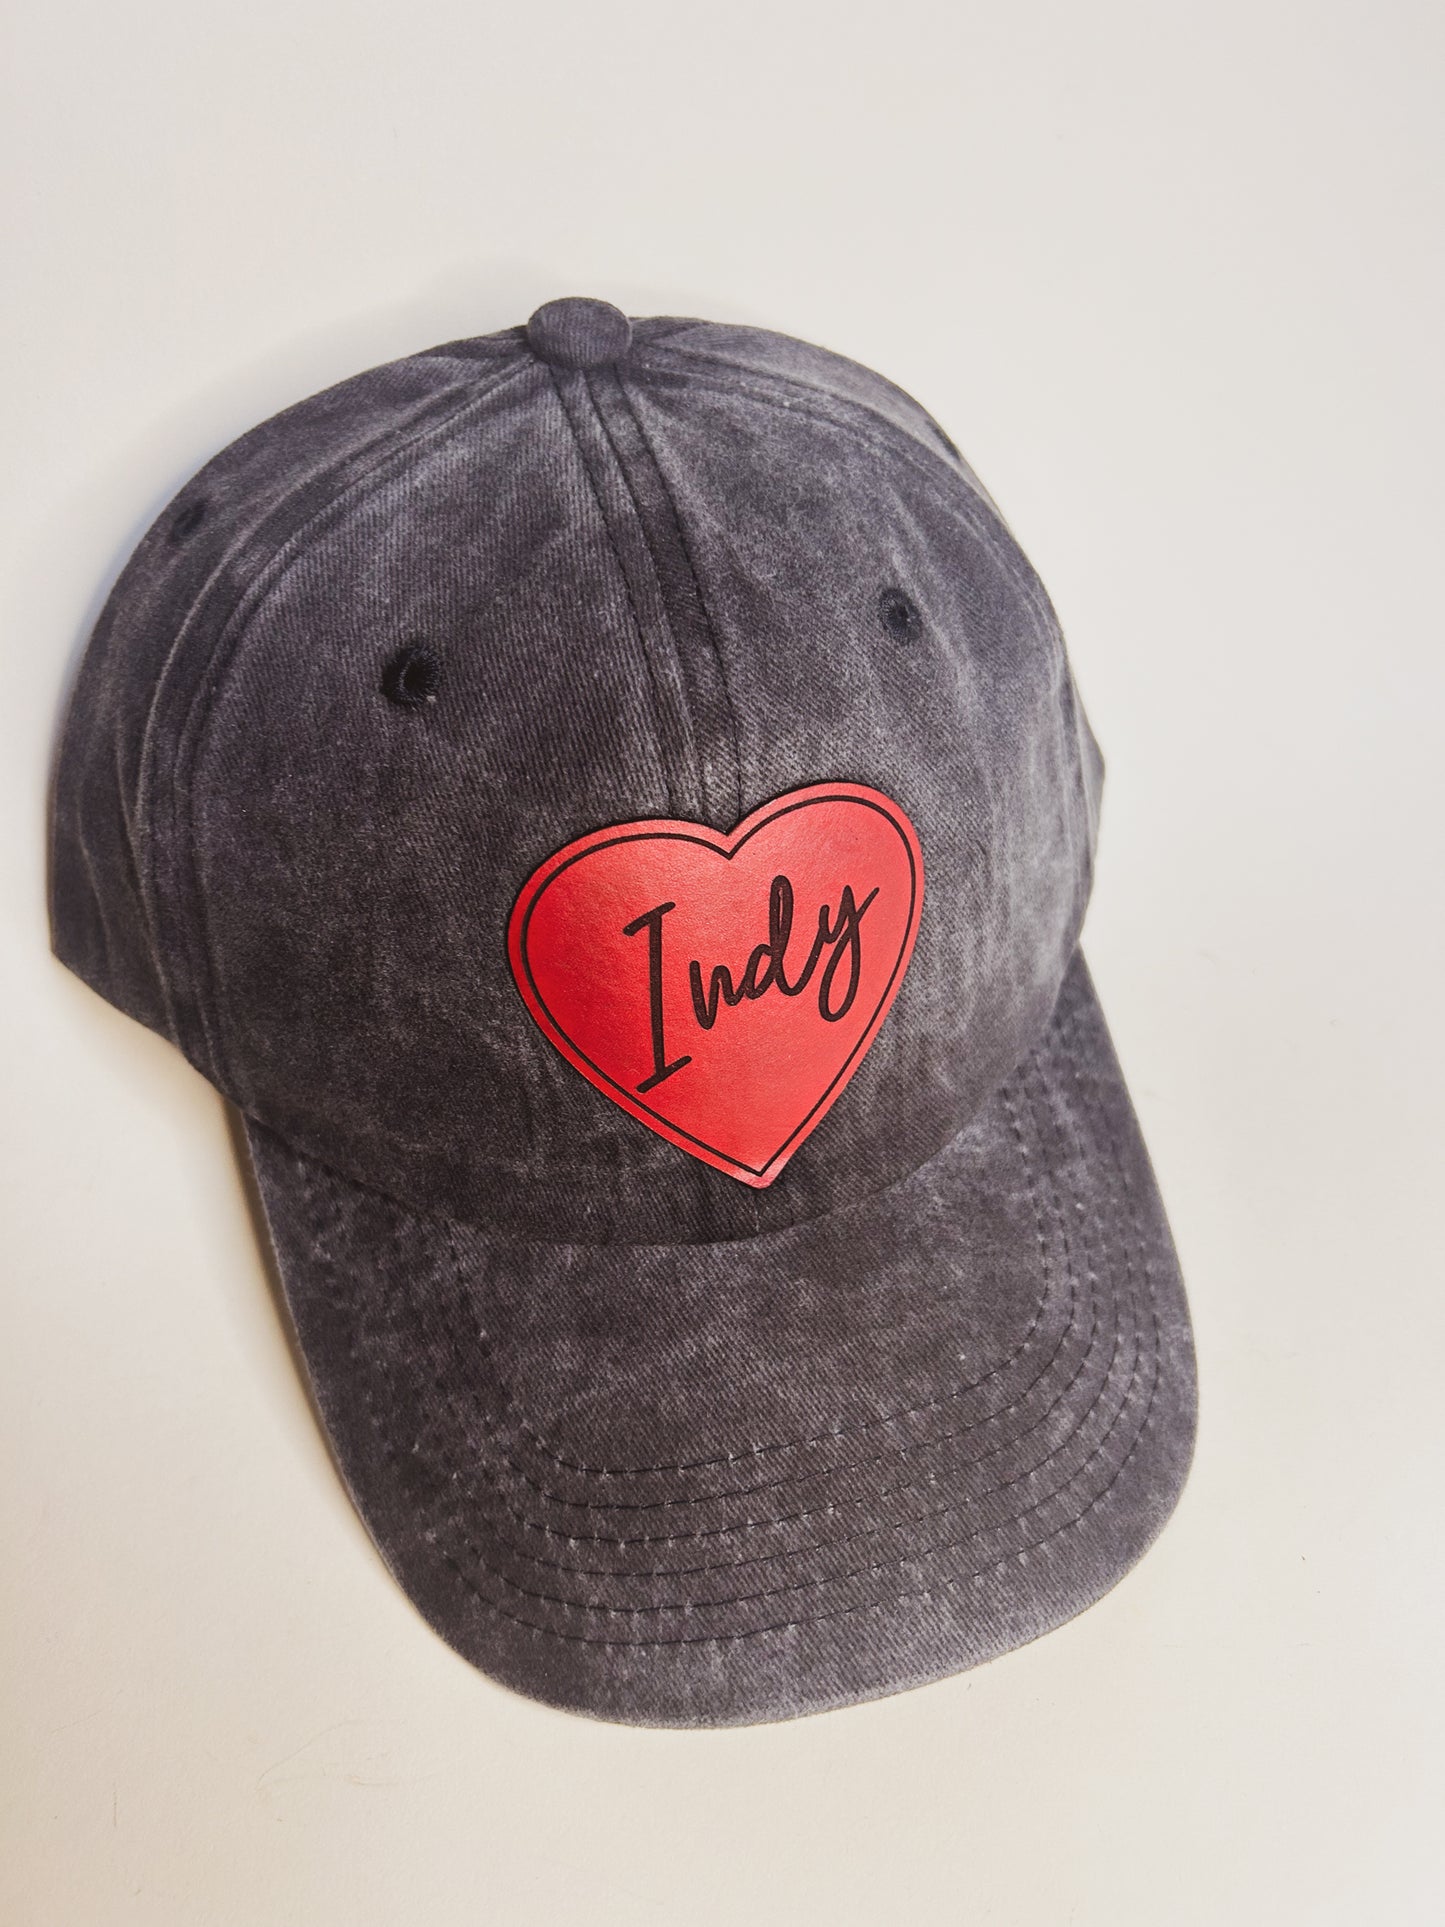 Red Indy Heart Patch on Black Baseball Hat